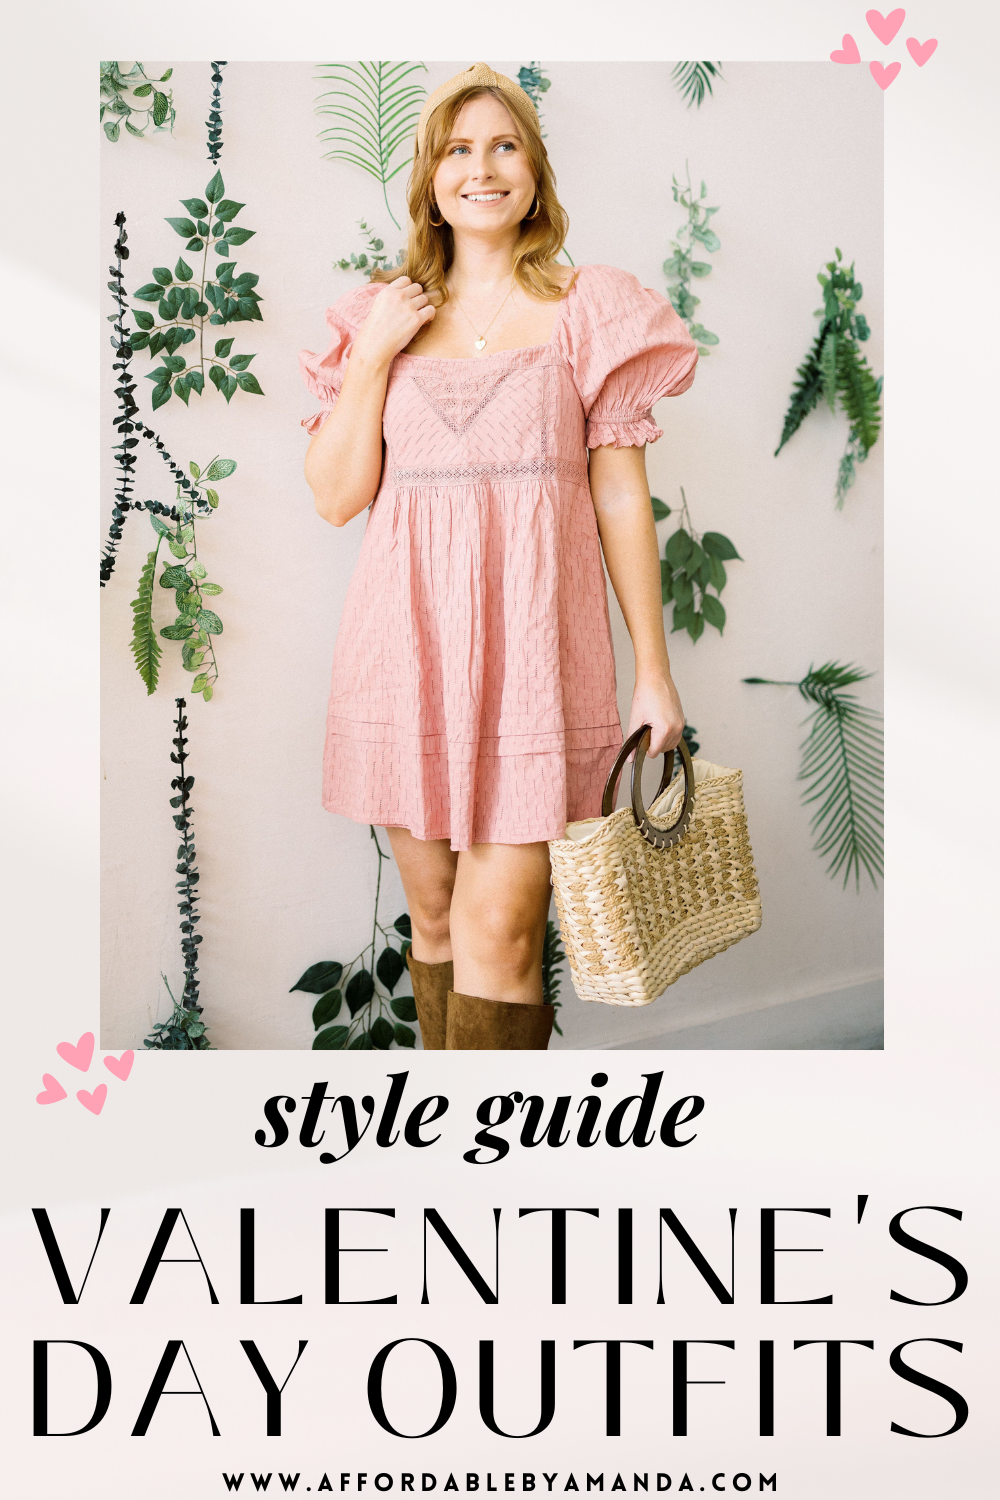 Valentine's Day Outfit Ideas - Affordable by Amanda